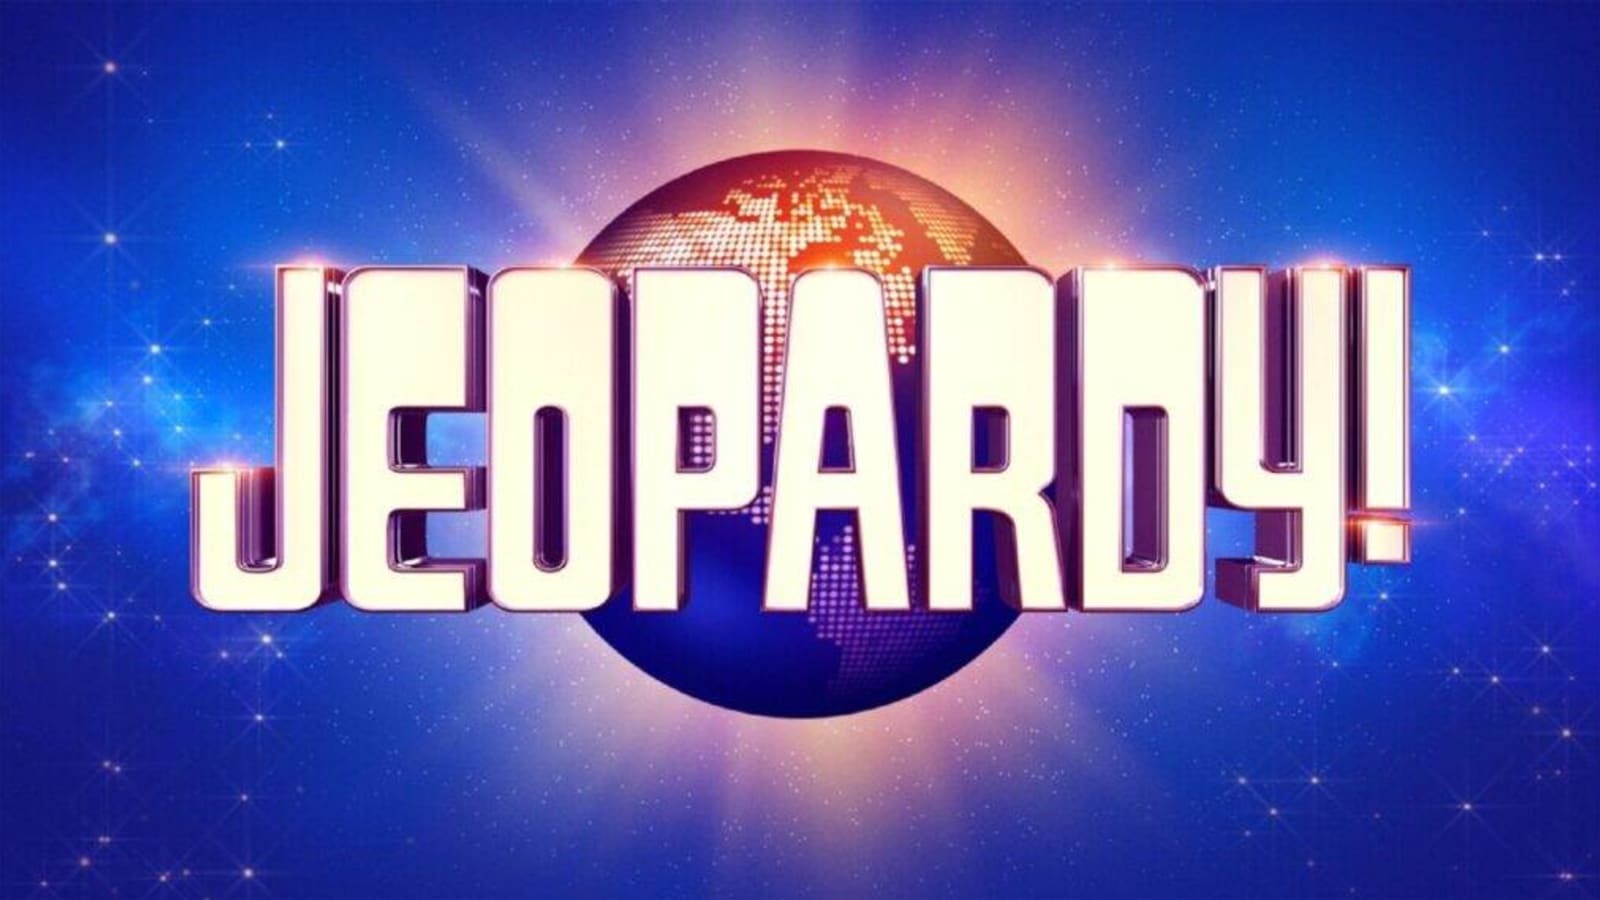 #Pop Culture Jeopardy!: Prime Video Orders Quiz Show Spin-Off Series